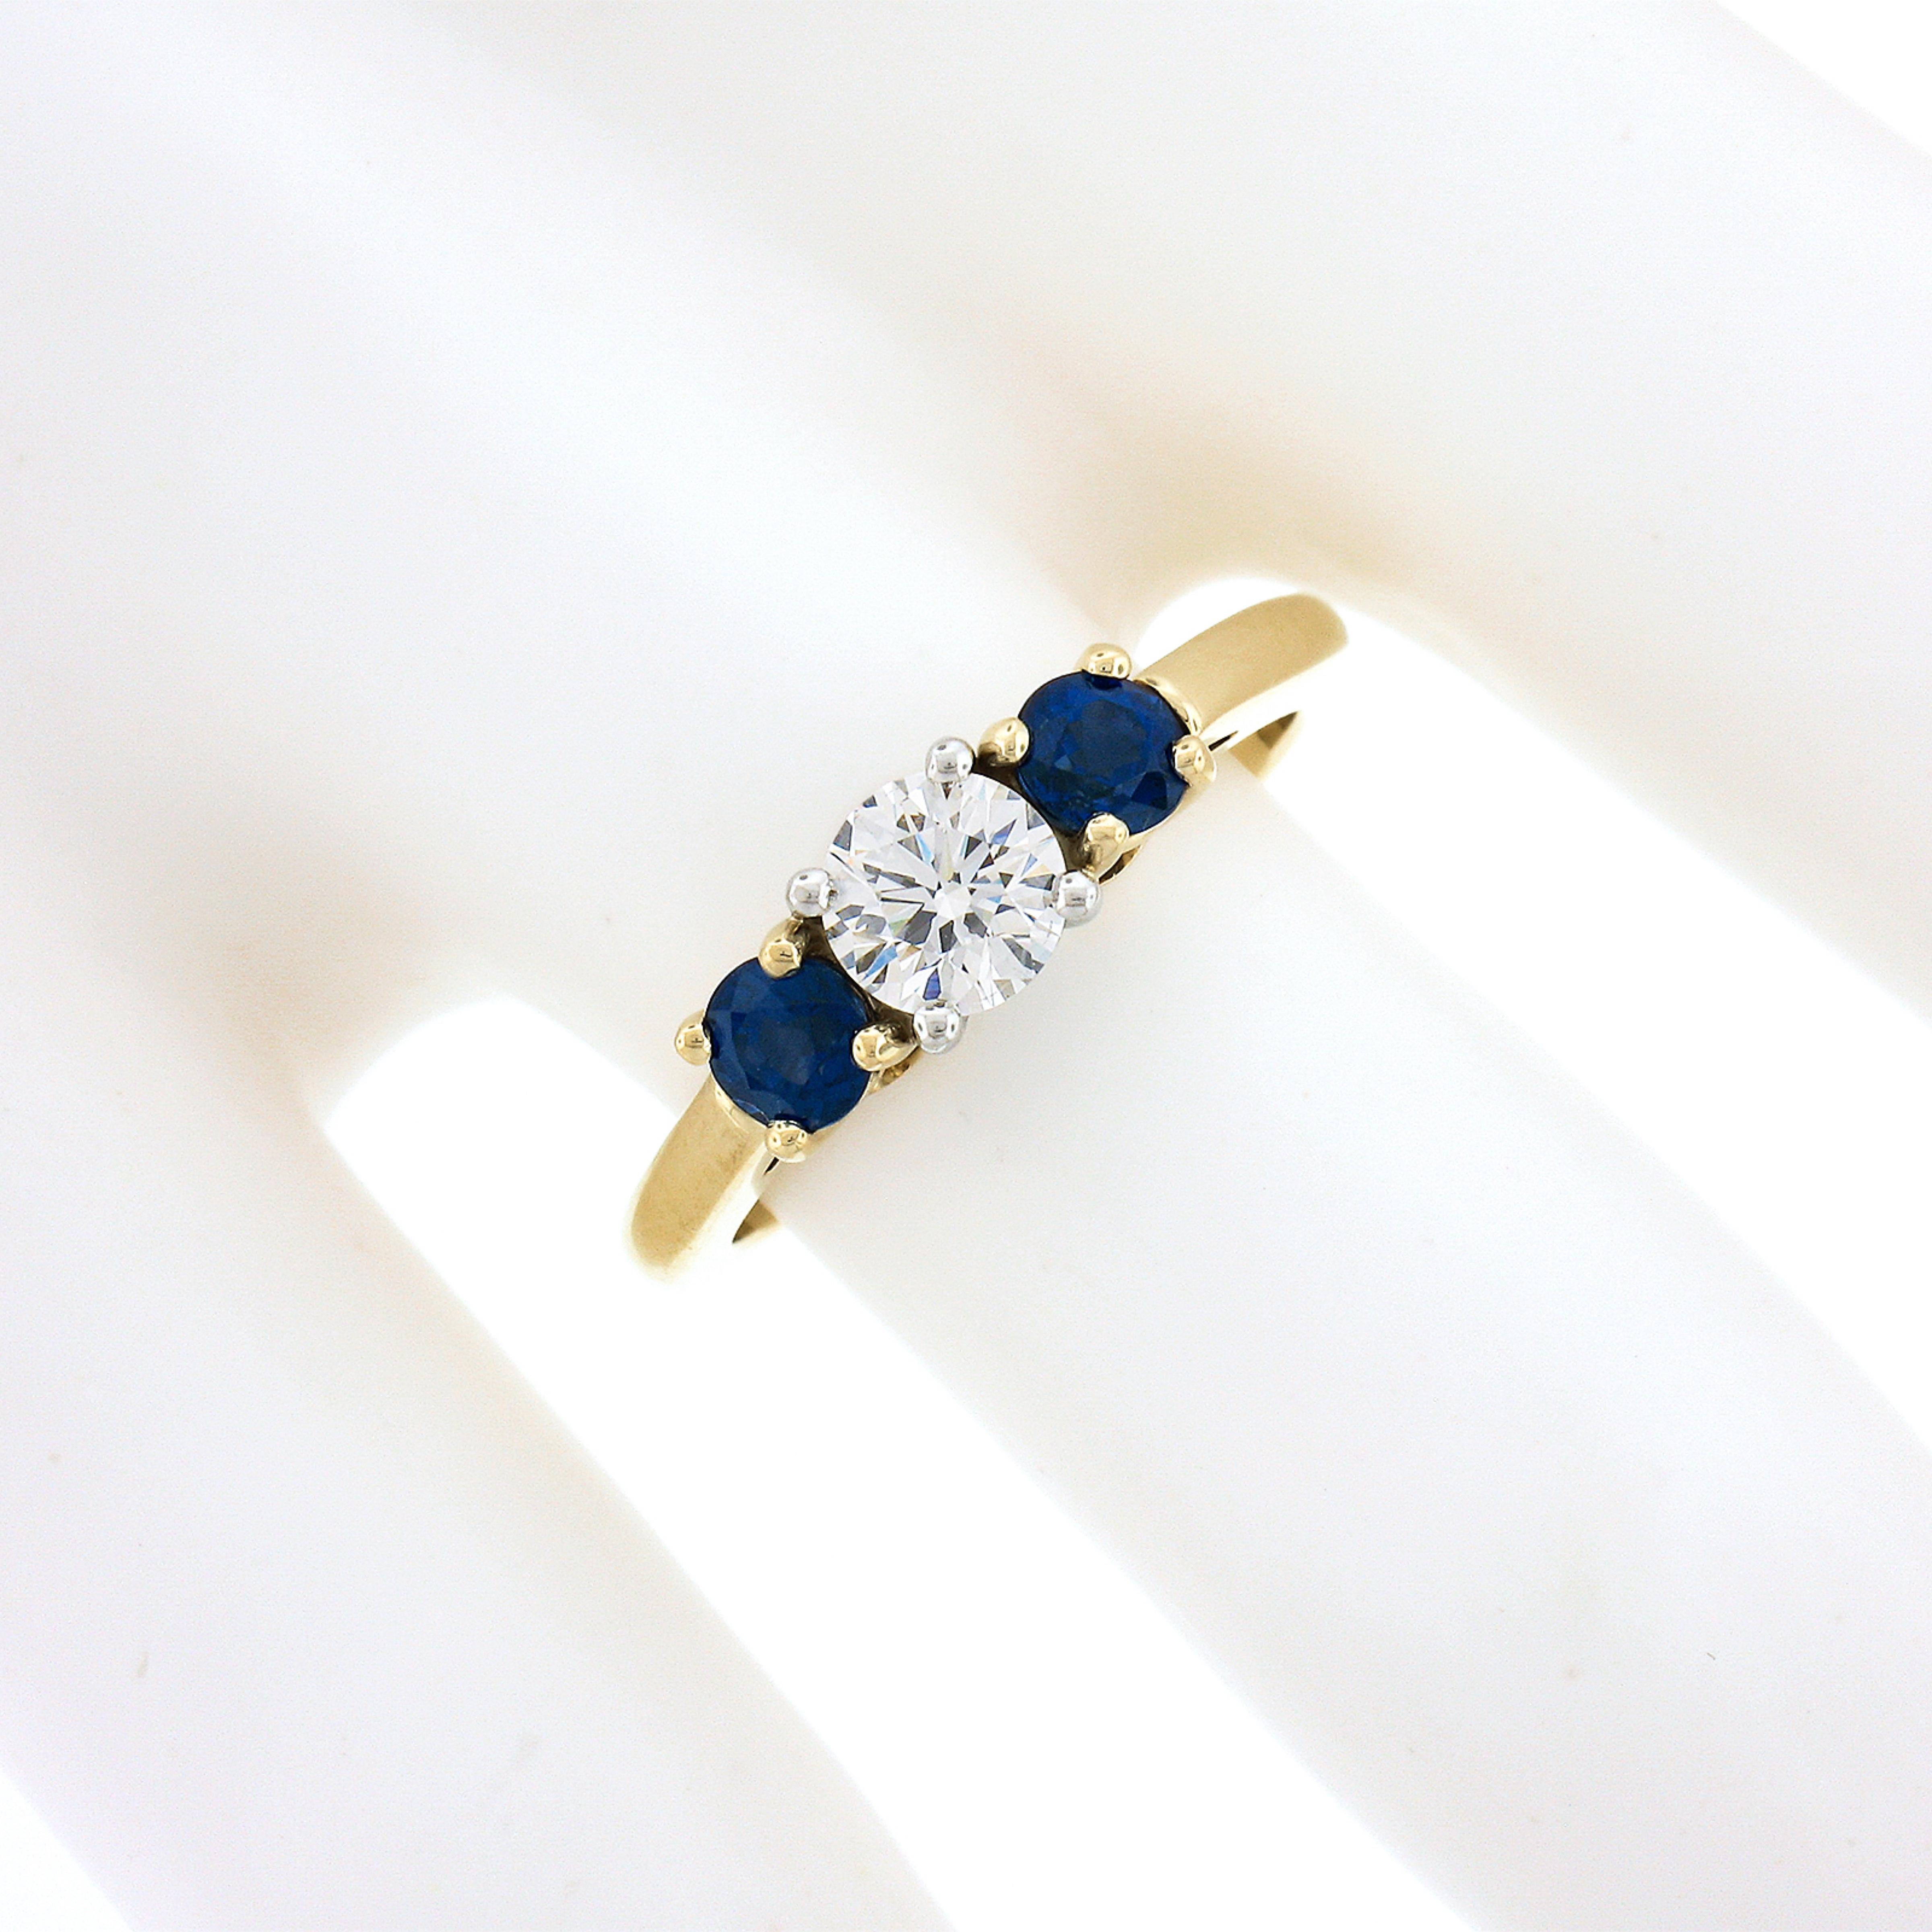 You are looking at a stunning diamond and sapphire, all original, Tiffany & Co. ring crafted in solid 18k yellow gold featuring an elegant three-stone style across its top. The gorgeous fine diamond solitaire is neatly prong set at the center in